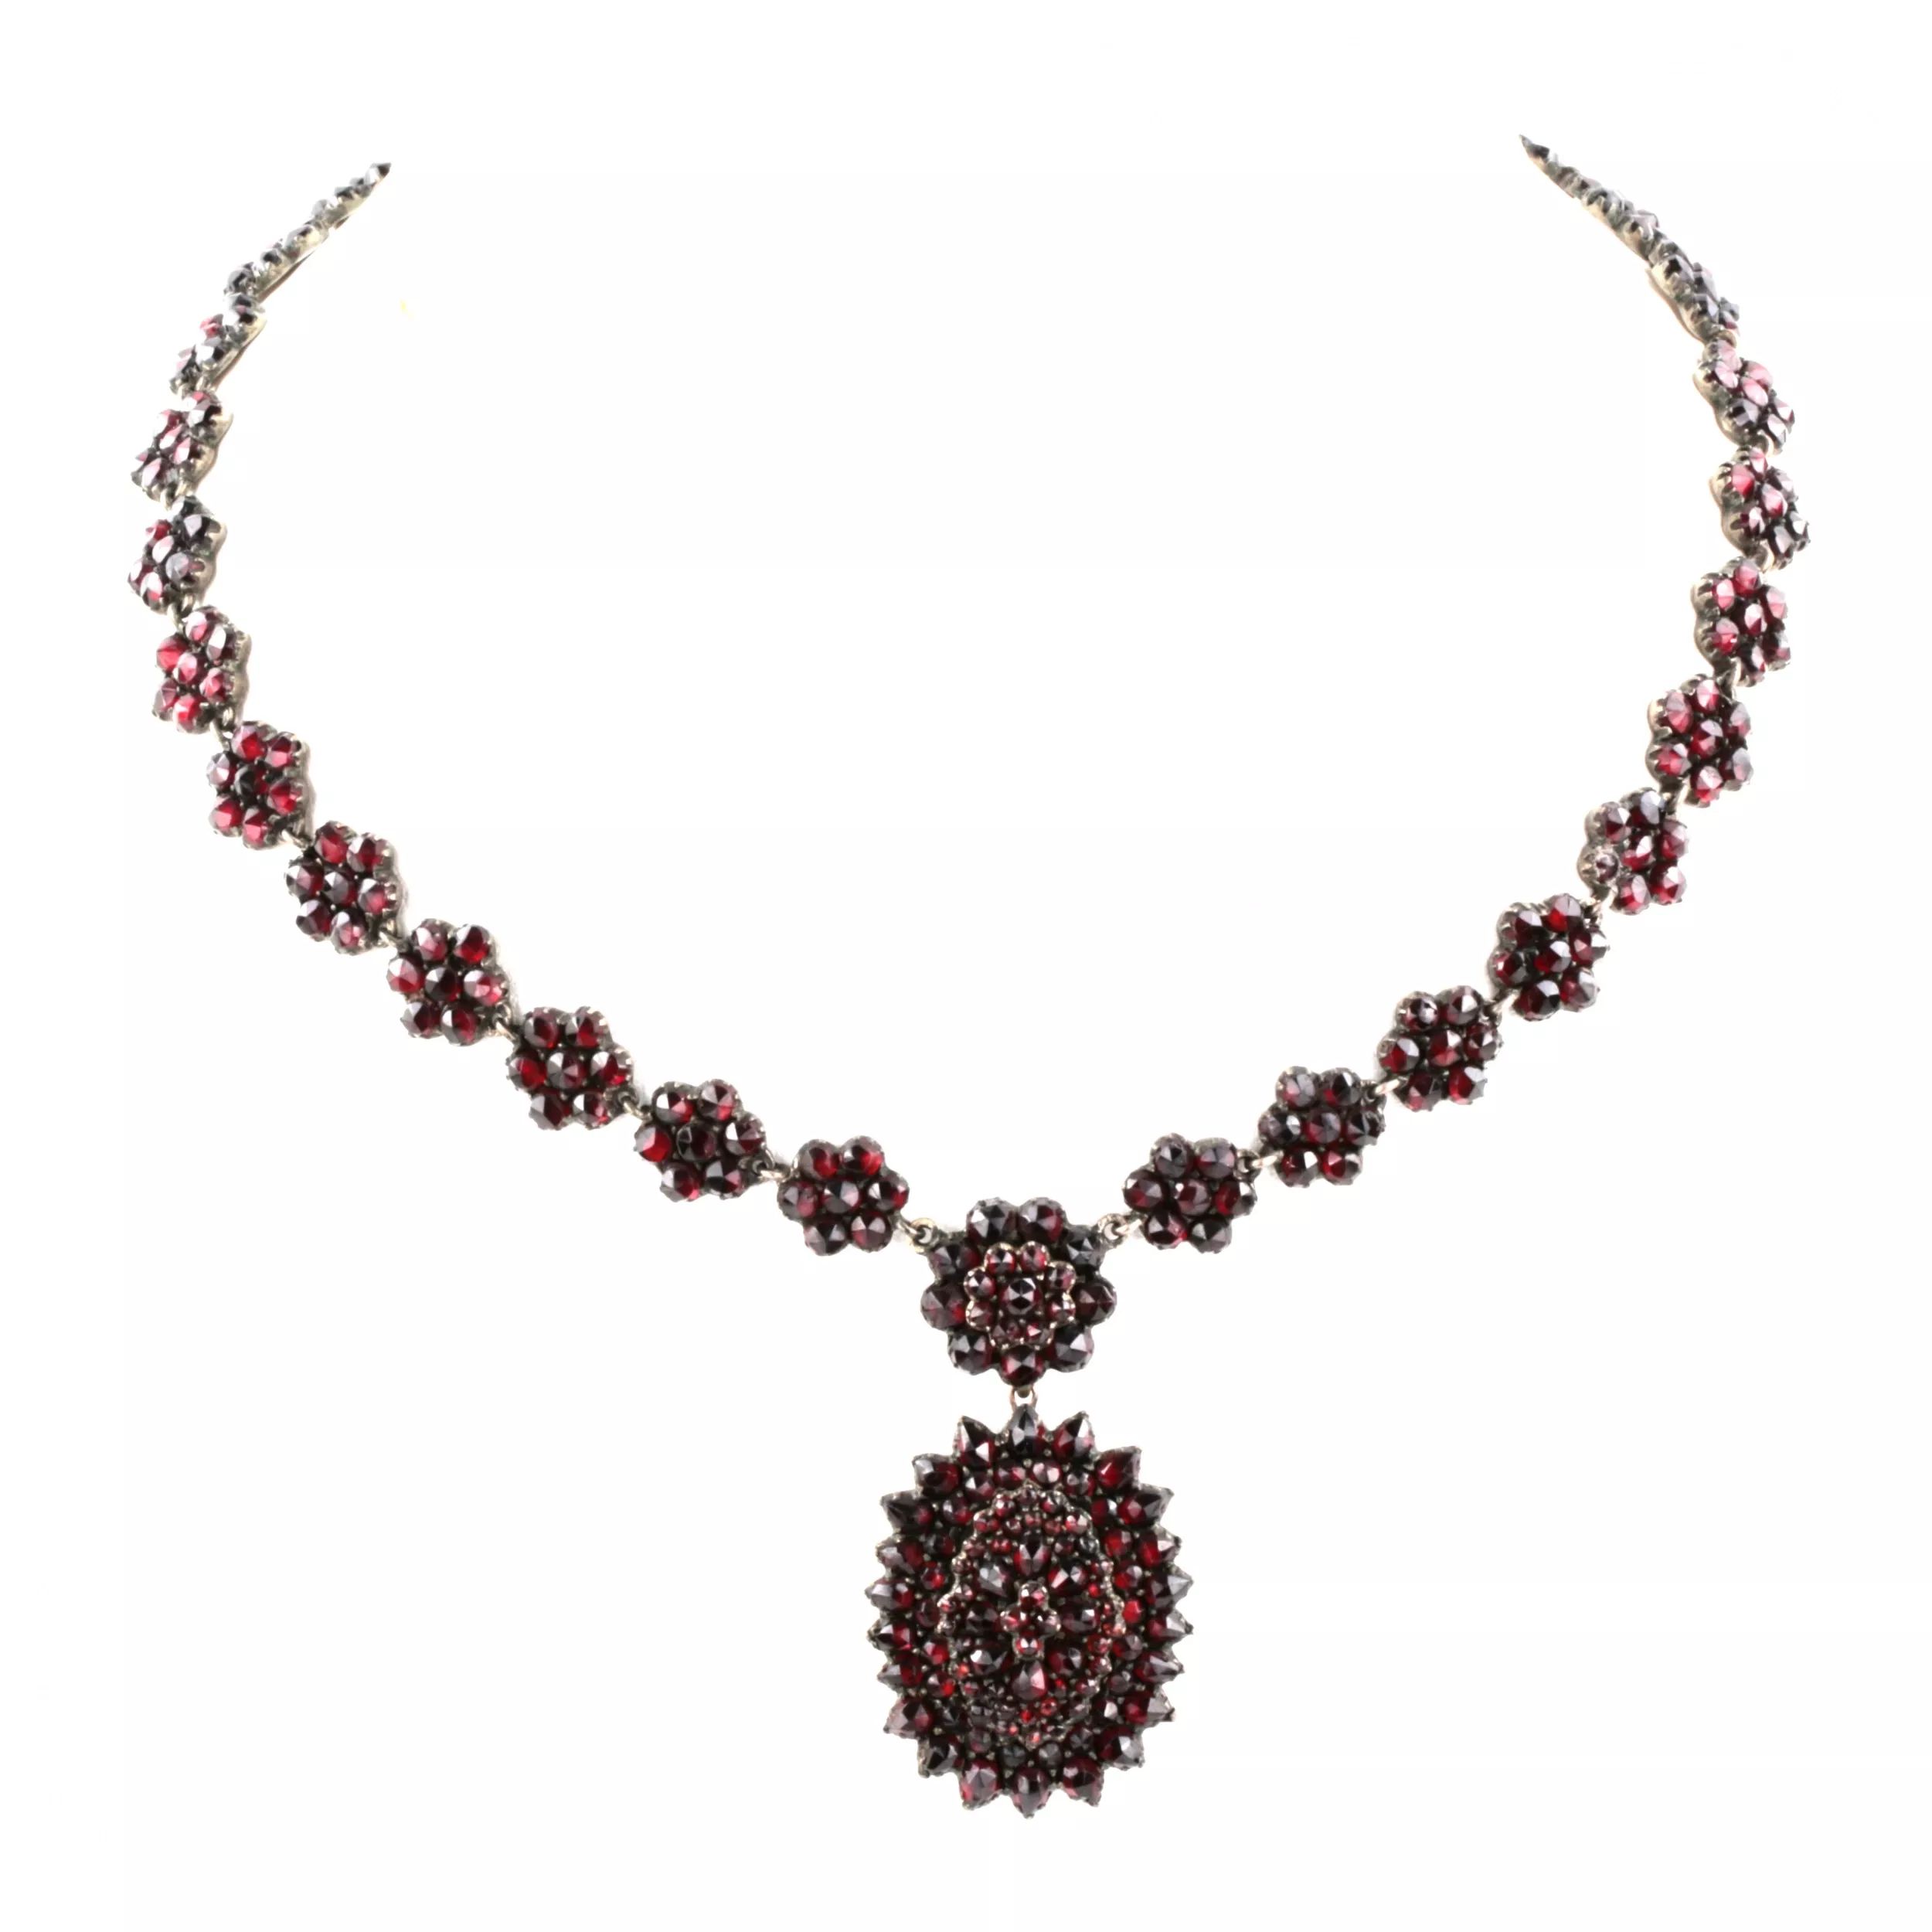 Necklace-with-garnets-on-silver-Europe-19th-century-